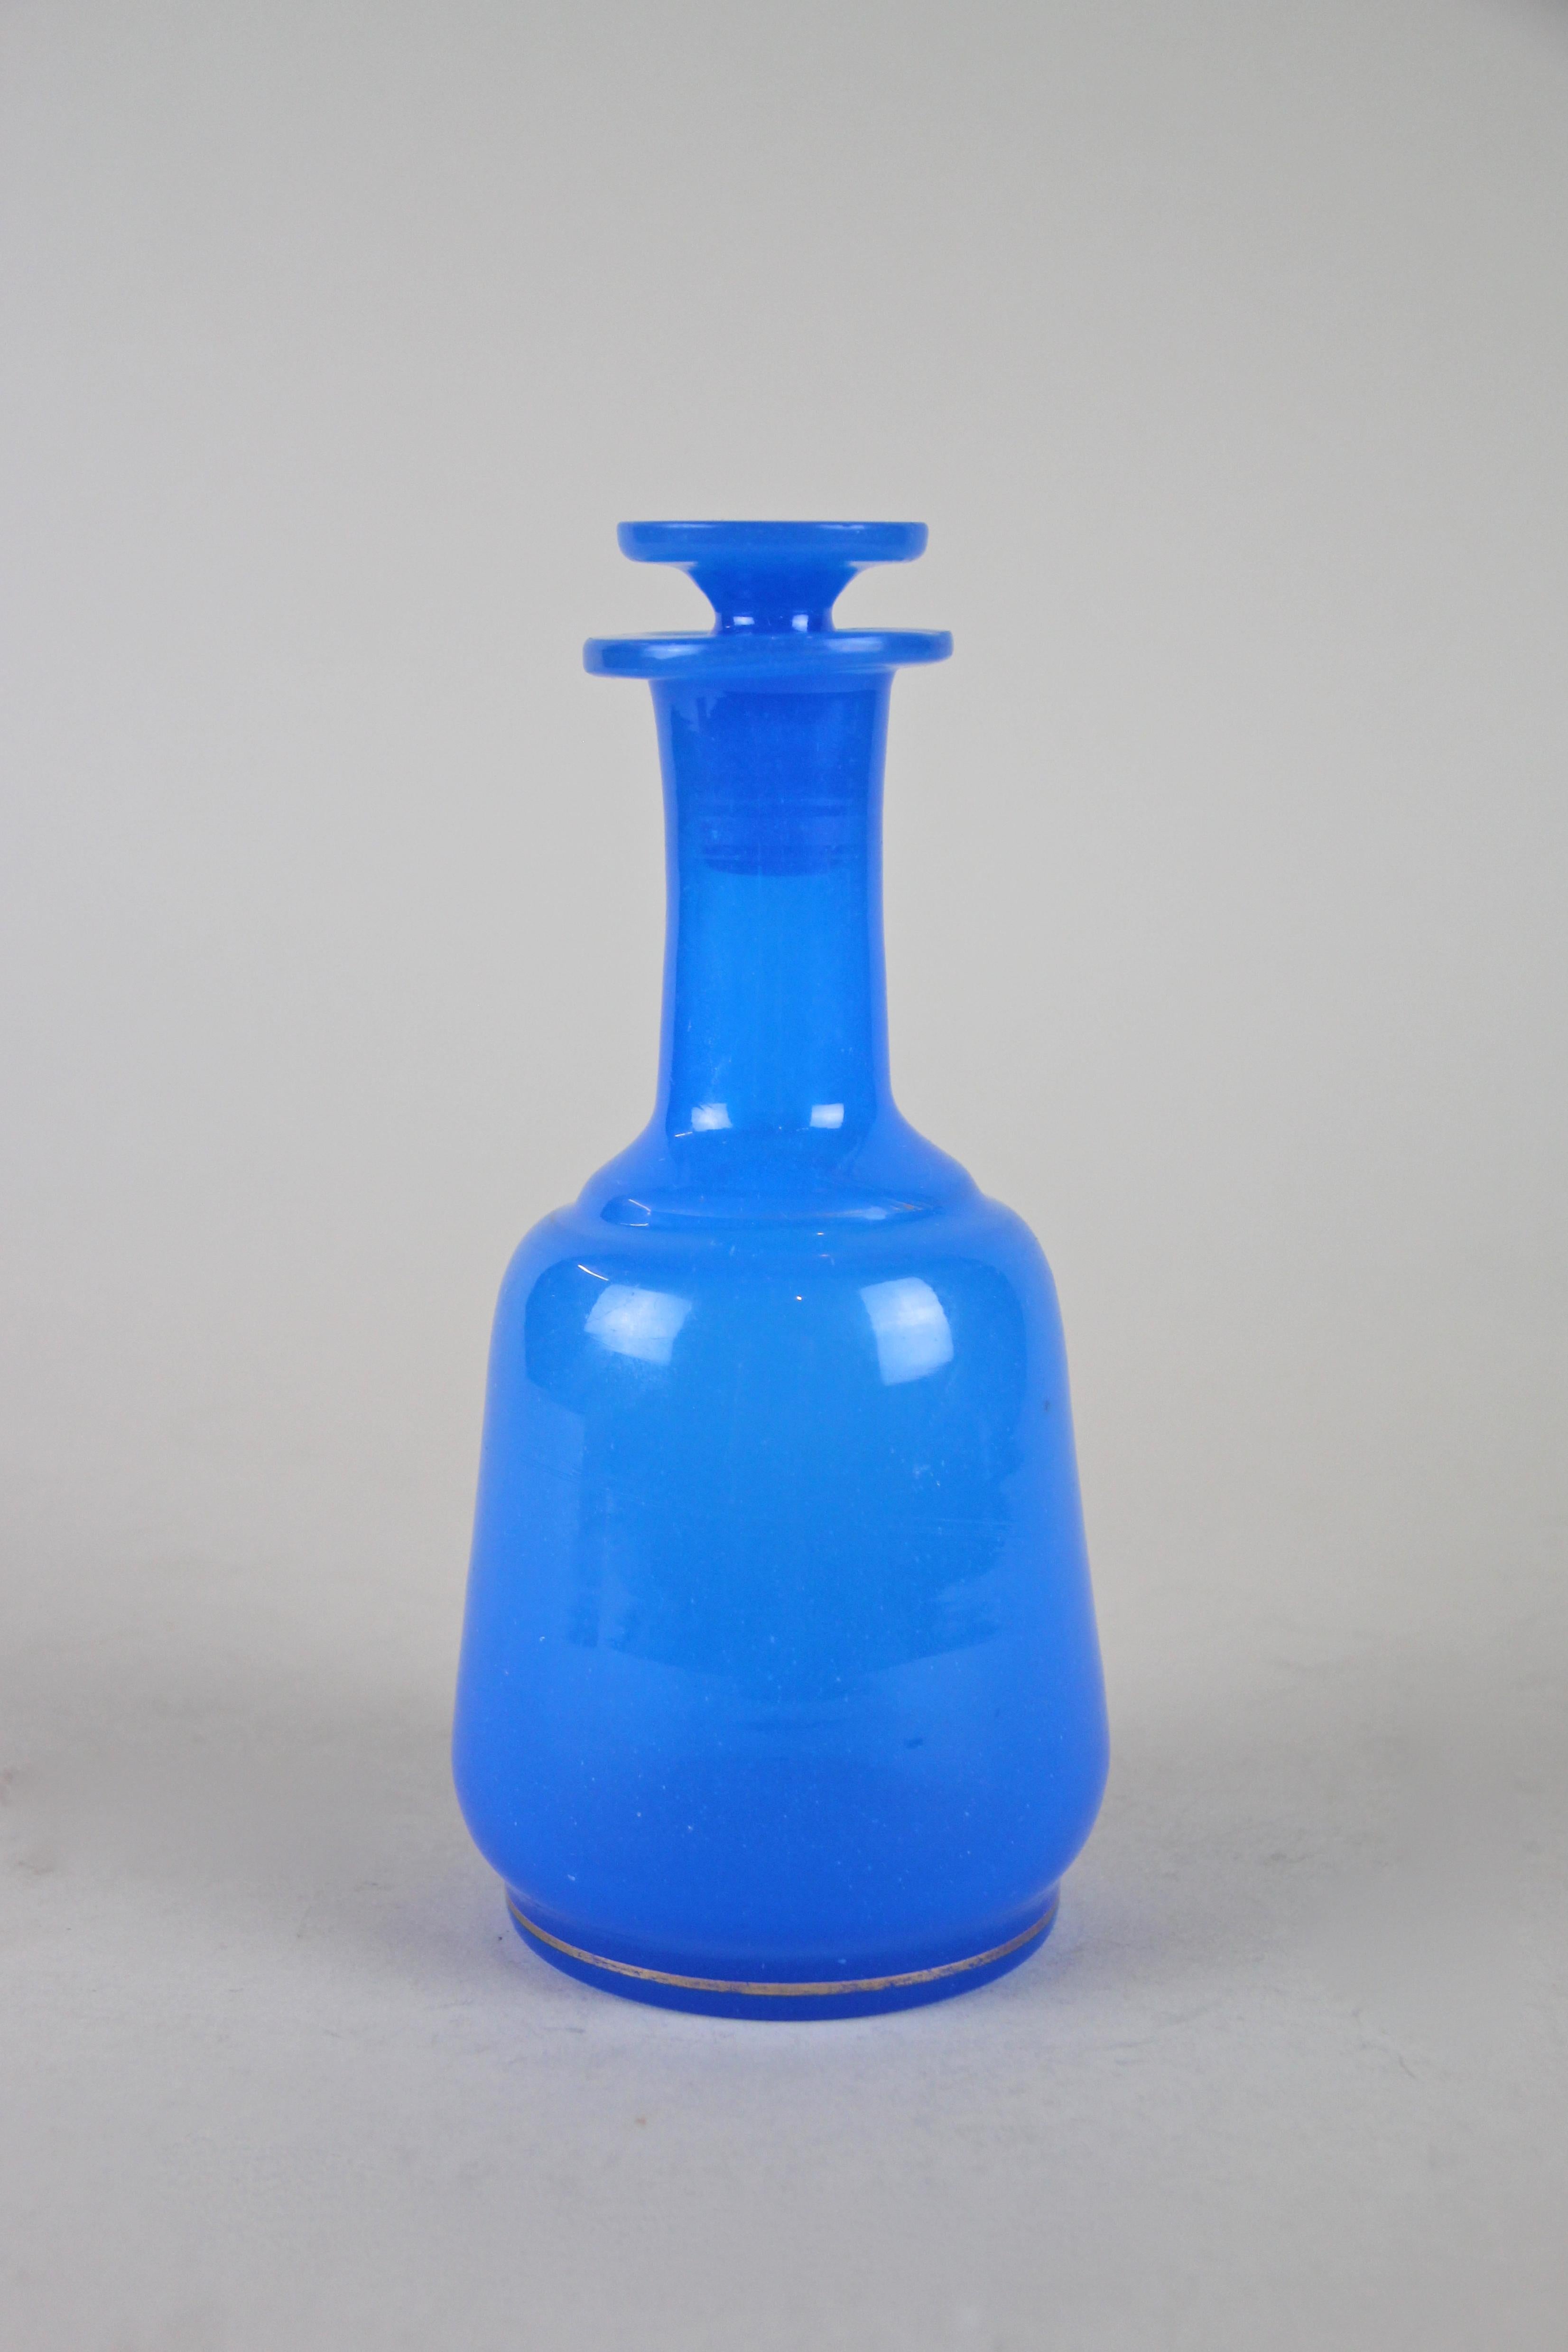 Gorgeous blue Biedermeier glass bottle from the mid-19th century in Austria, circa 1840. This beautiful shaped glass bottle comes with a glass plug showing a nice design on top. A golden line around the base builds a nice contrast to the great sky